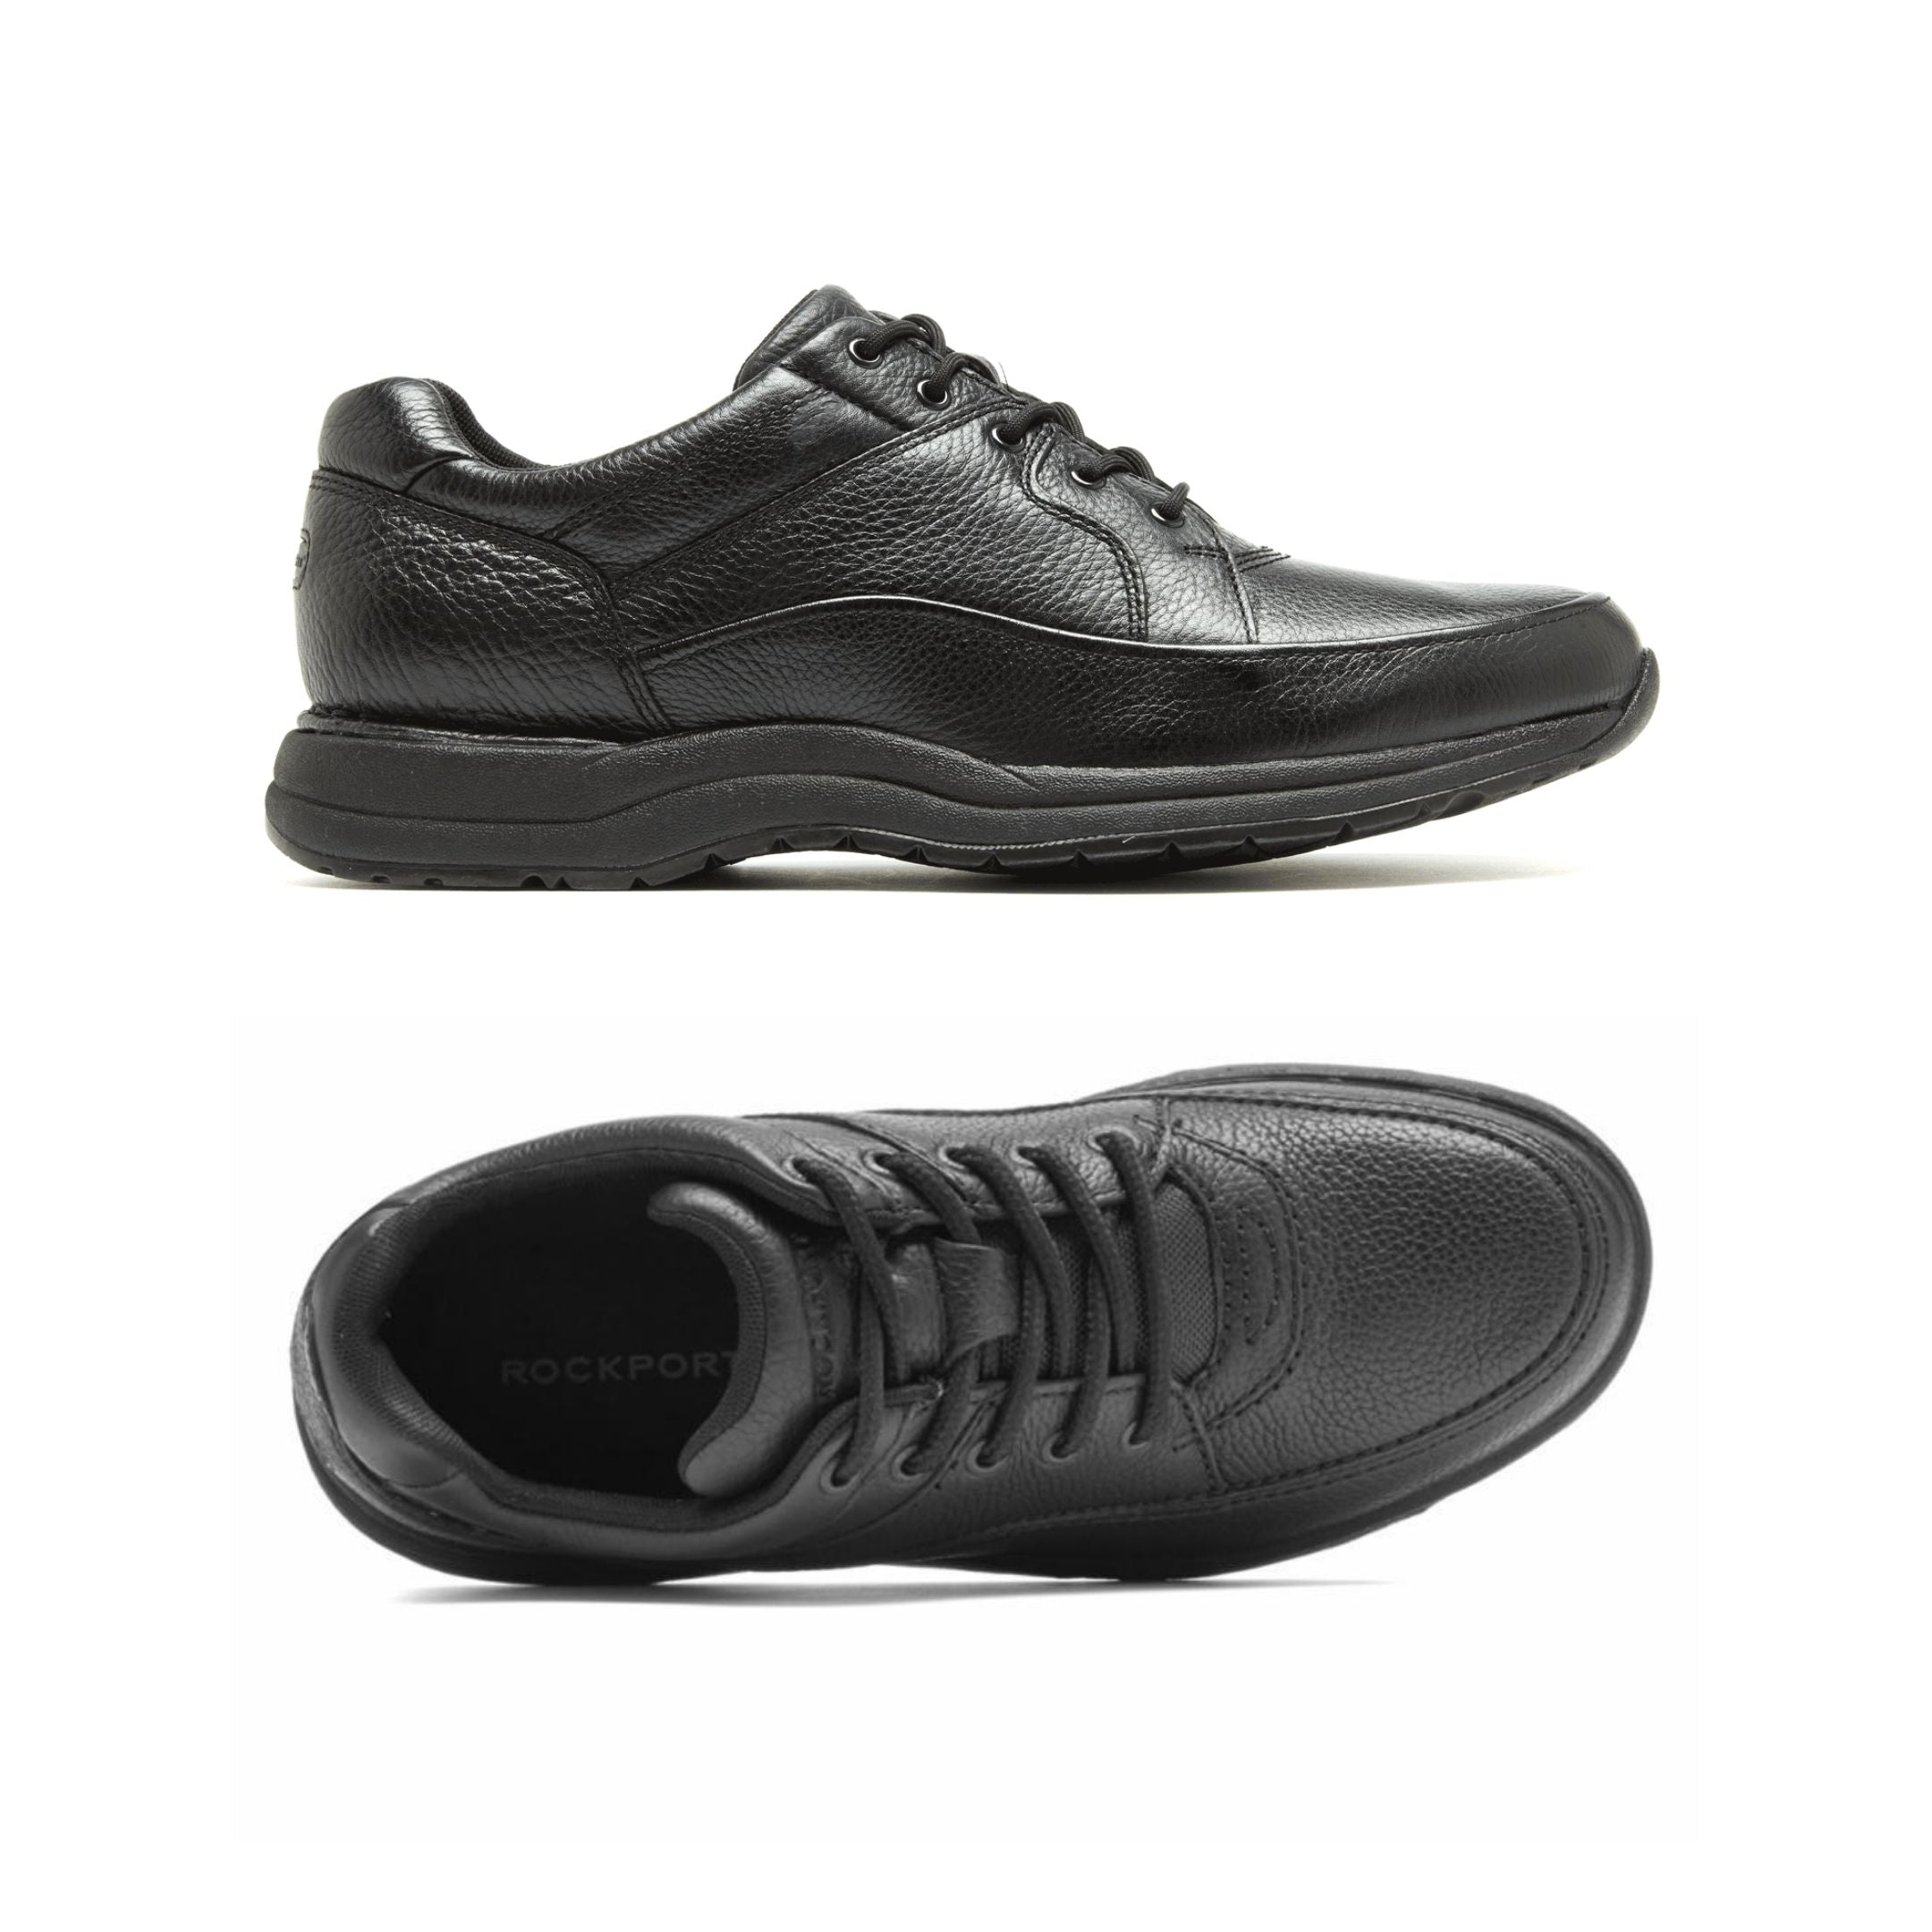 Top and side view of black leather lace up shoe. Rockport logo showing in heel.